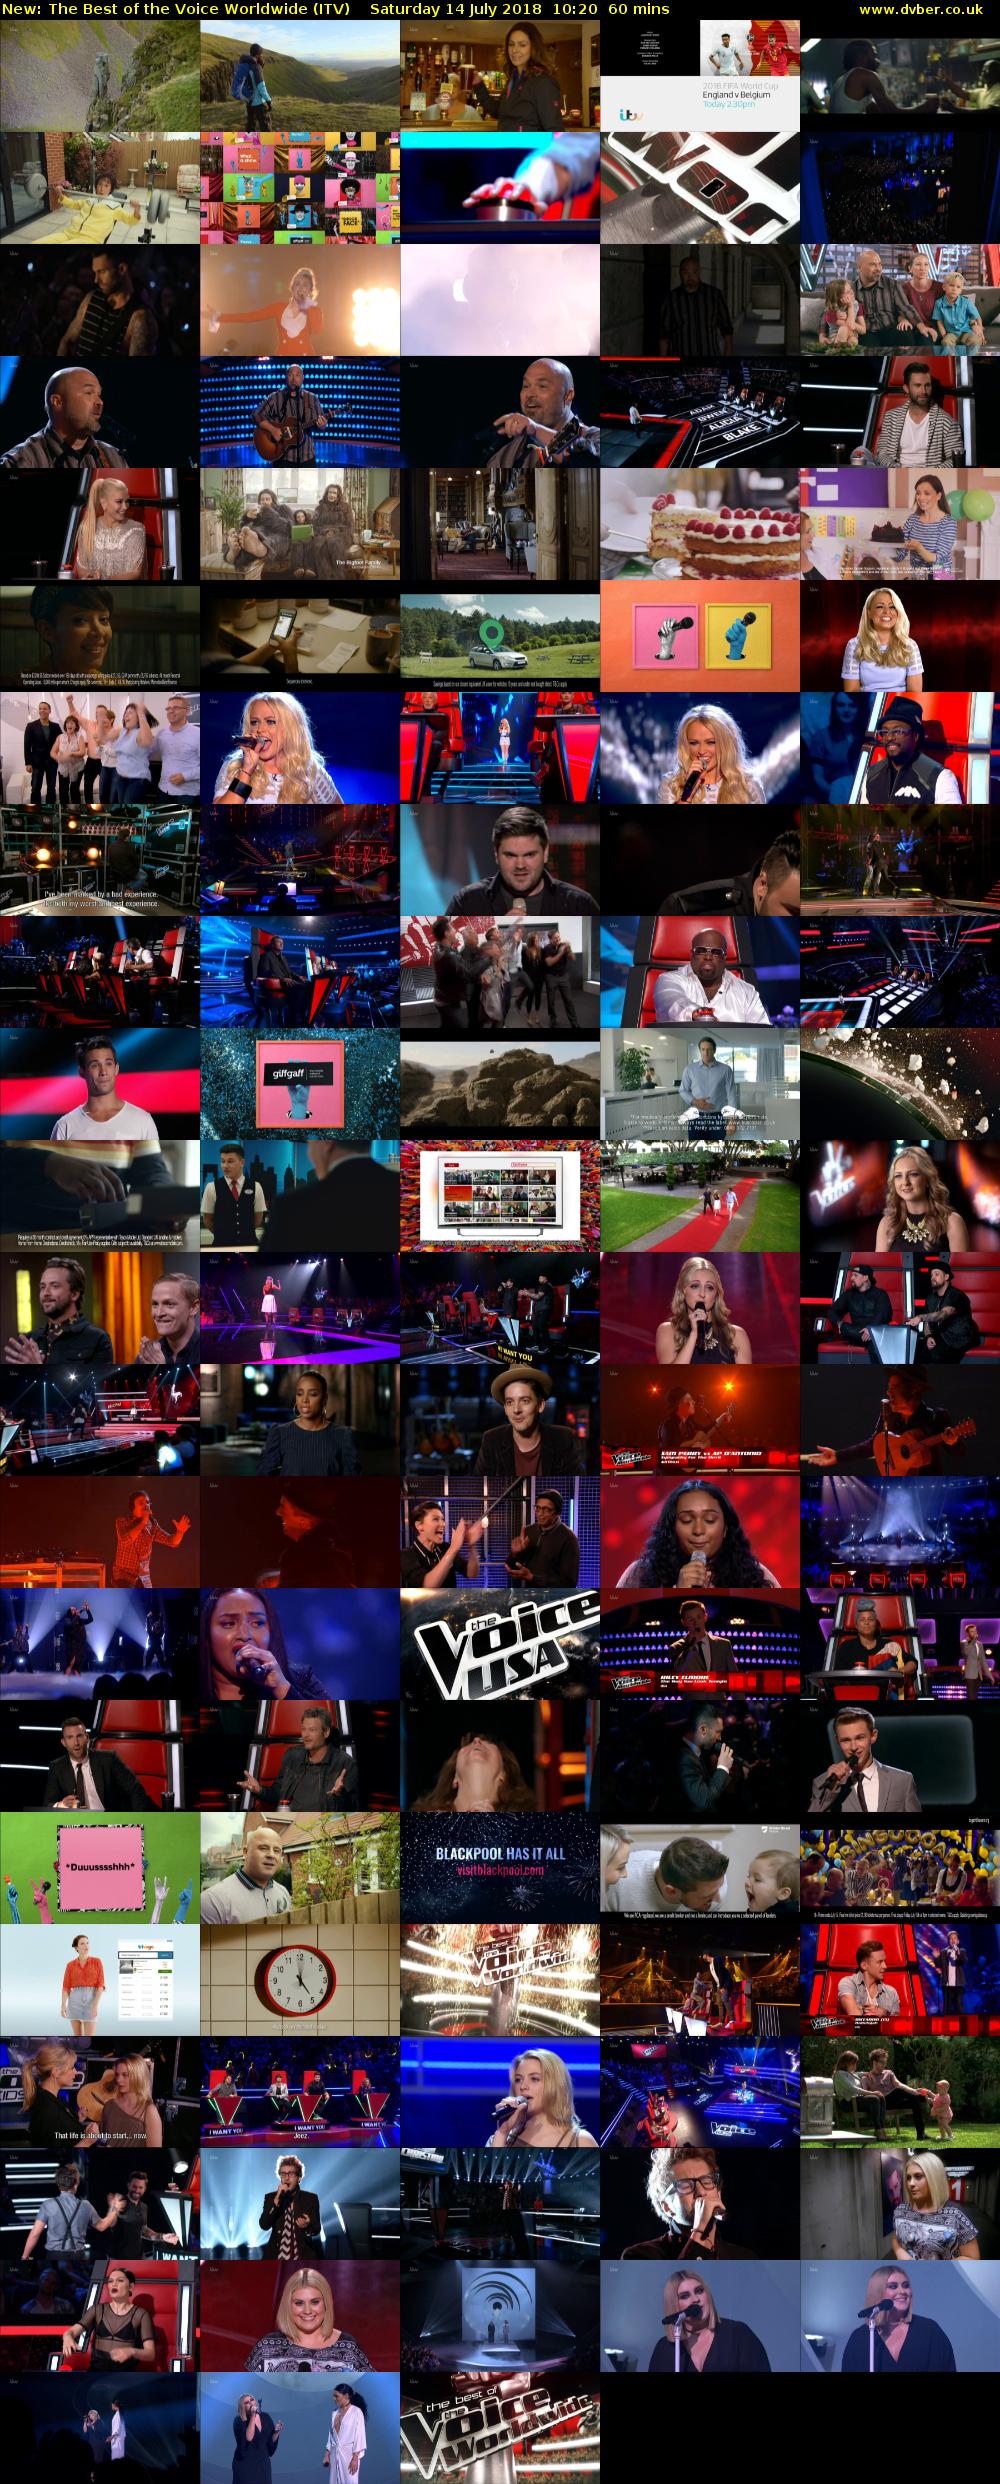 The Best of the Voice Worldwide (ITV) Saturday 14 July 2018 10:20 - 11:20